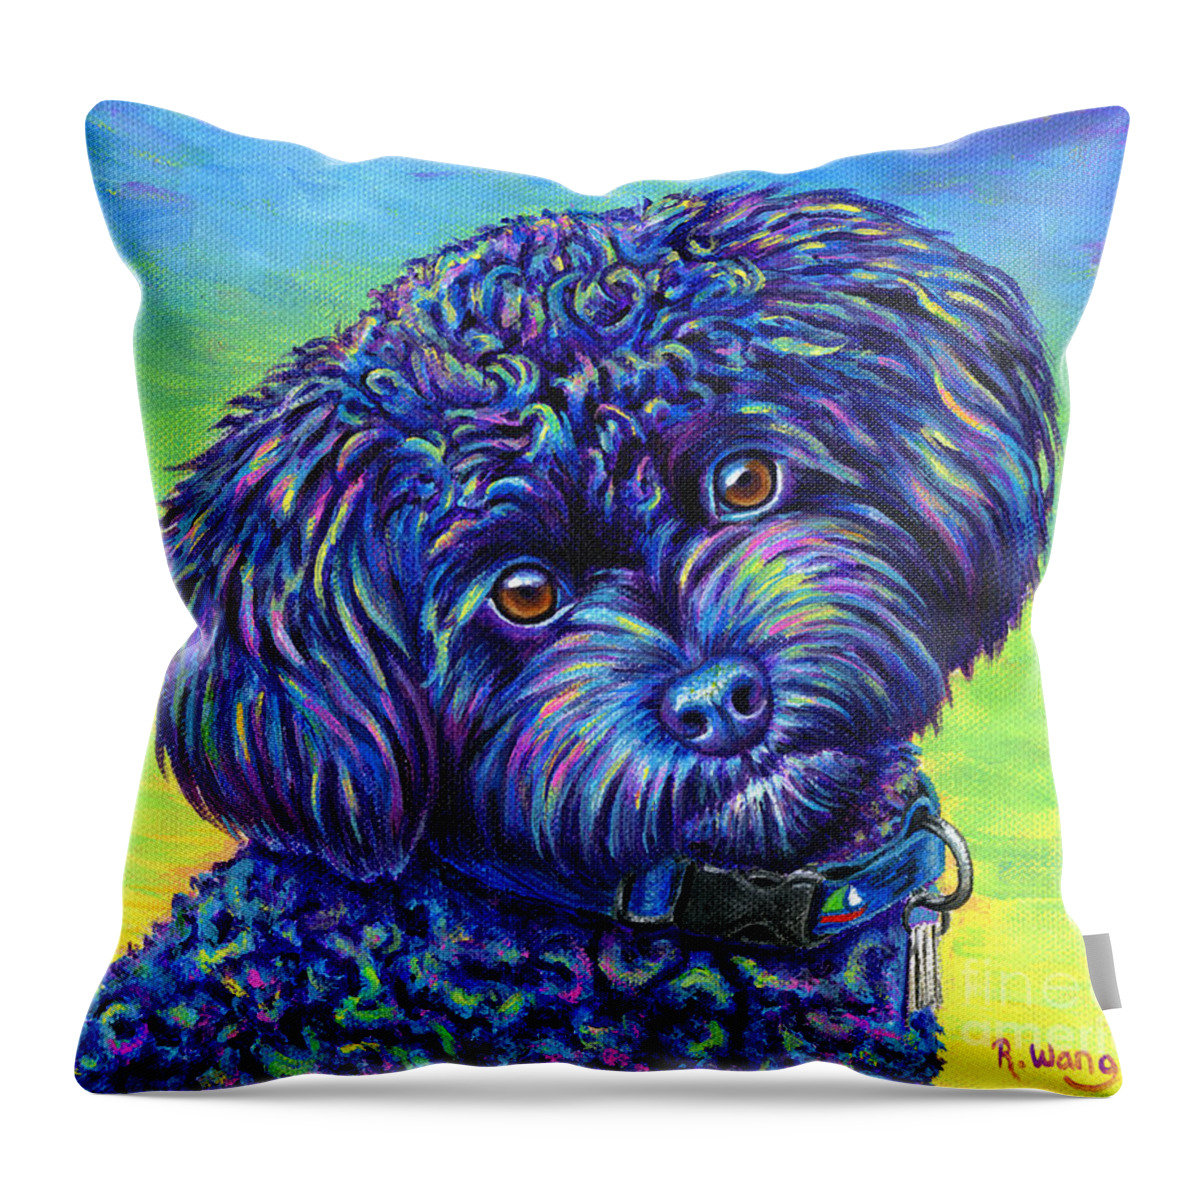 Poodle Throw Pillow featuring the painting Opalescent - Black Toy Poodle by Rebecca Wang